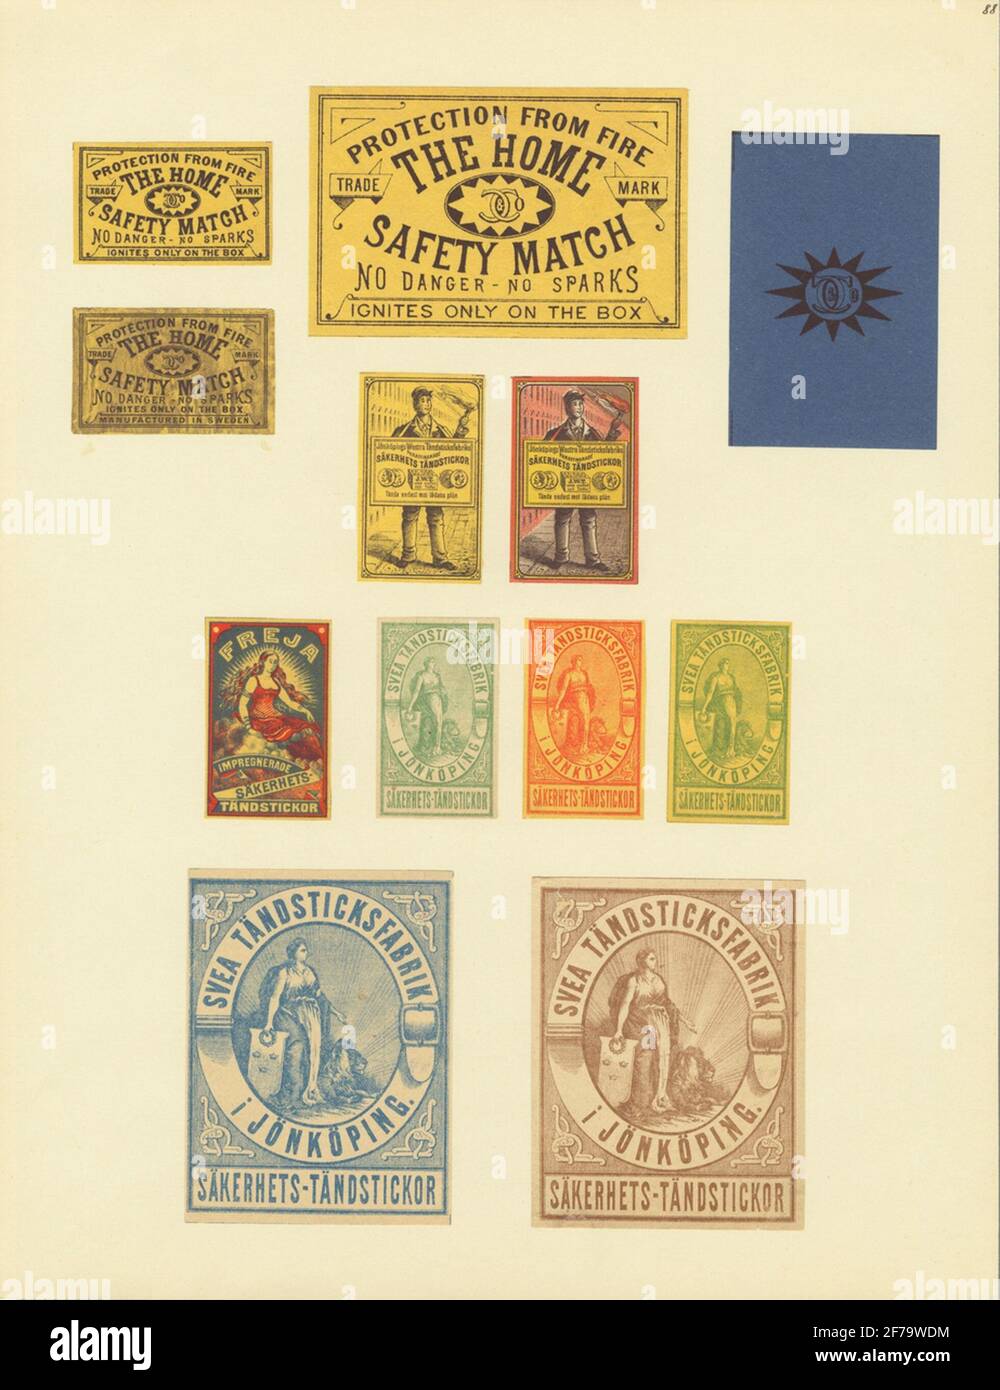 Labels for matchboxes, from the Swedish Industrial and Trading Museum. (Svea  Match Factory, Jönköping Westra match factory Stock Photo - Alamy